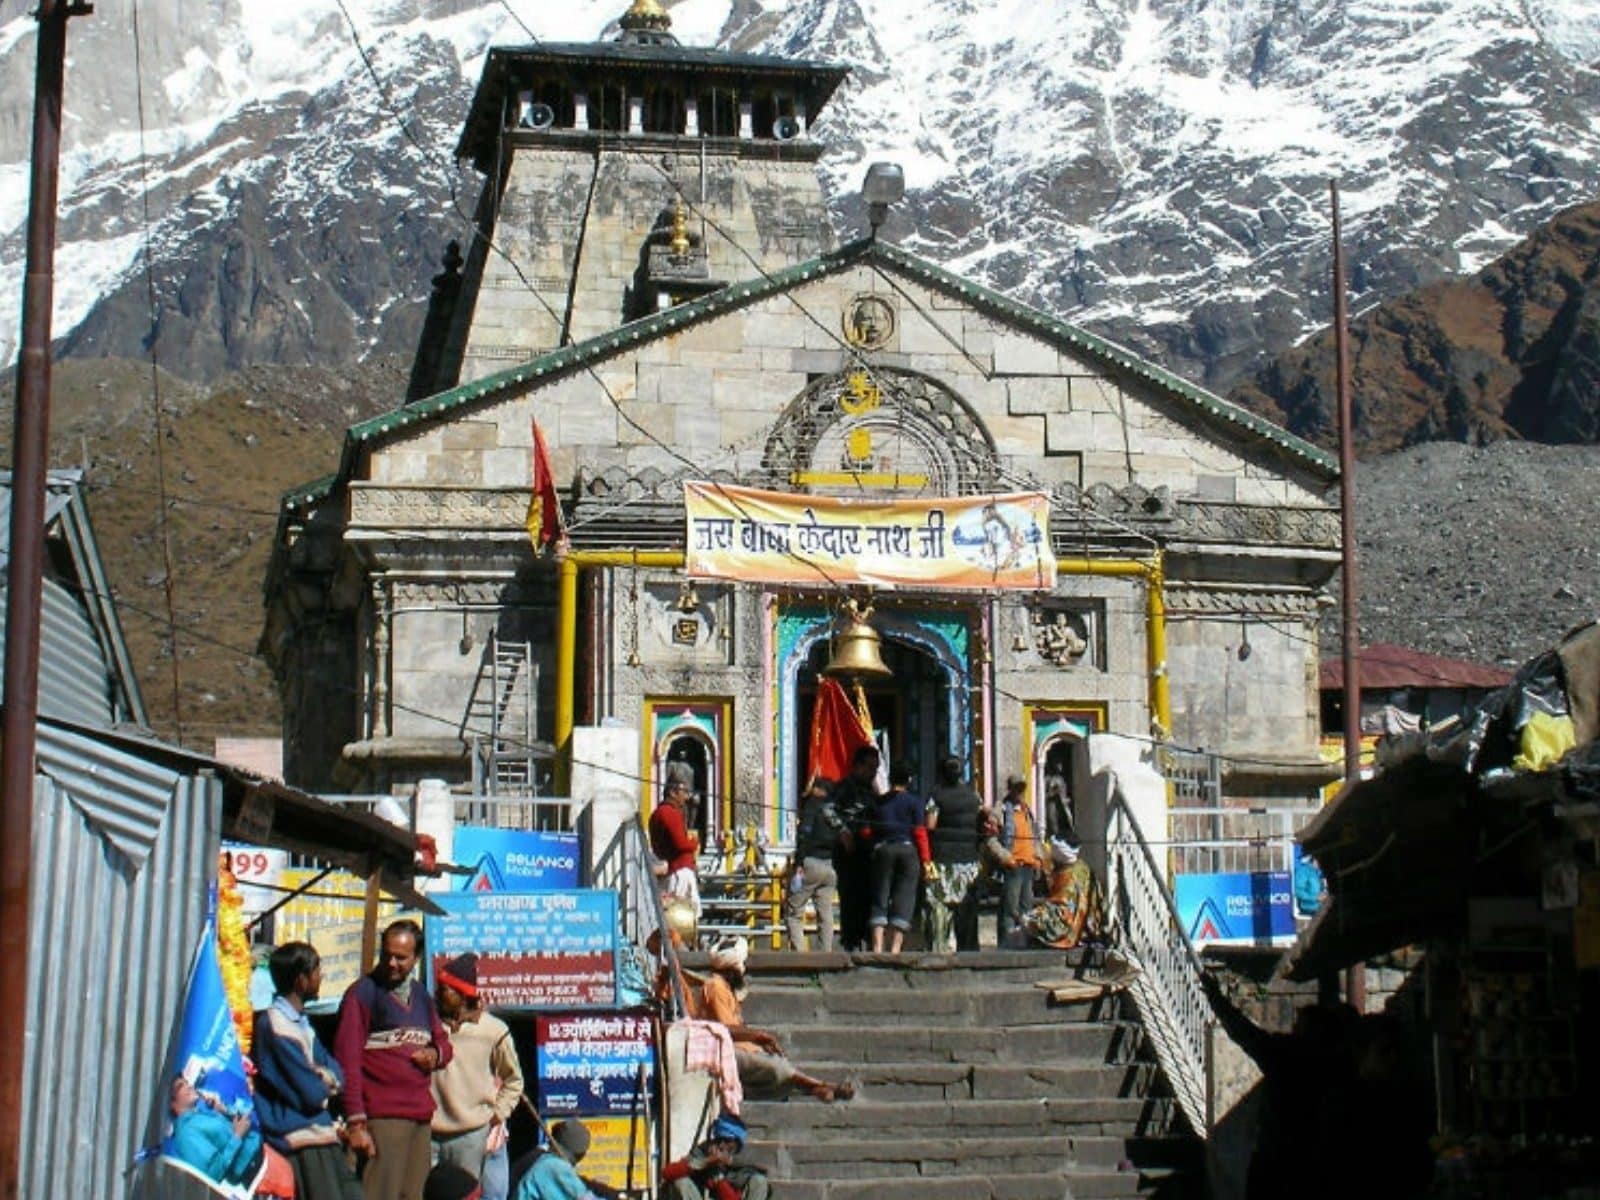 Pilgrim Deaths in Just 25 Days of Char Dham Yatra; Here's Why Toll is Higher This Year & What Experts Say